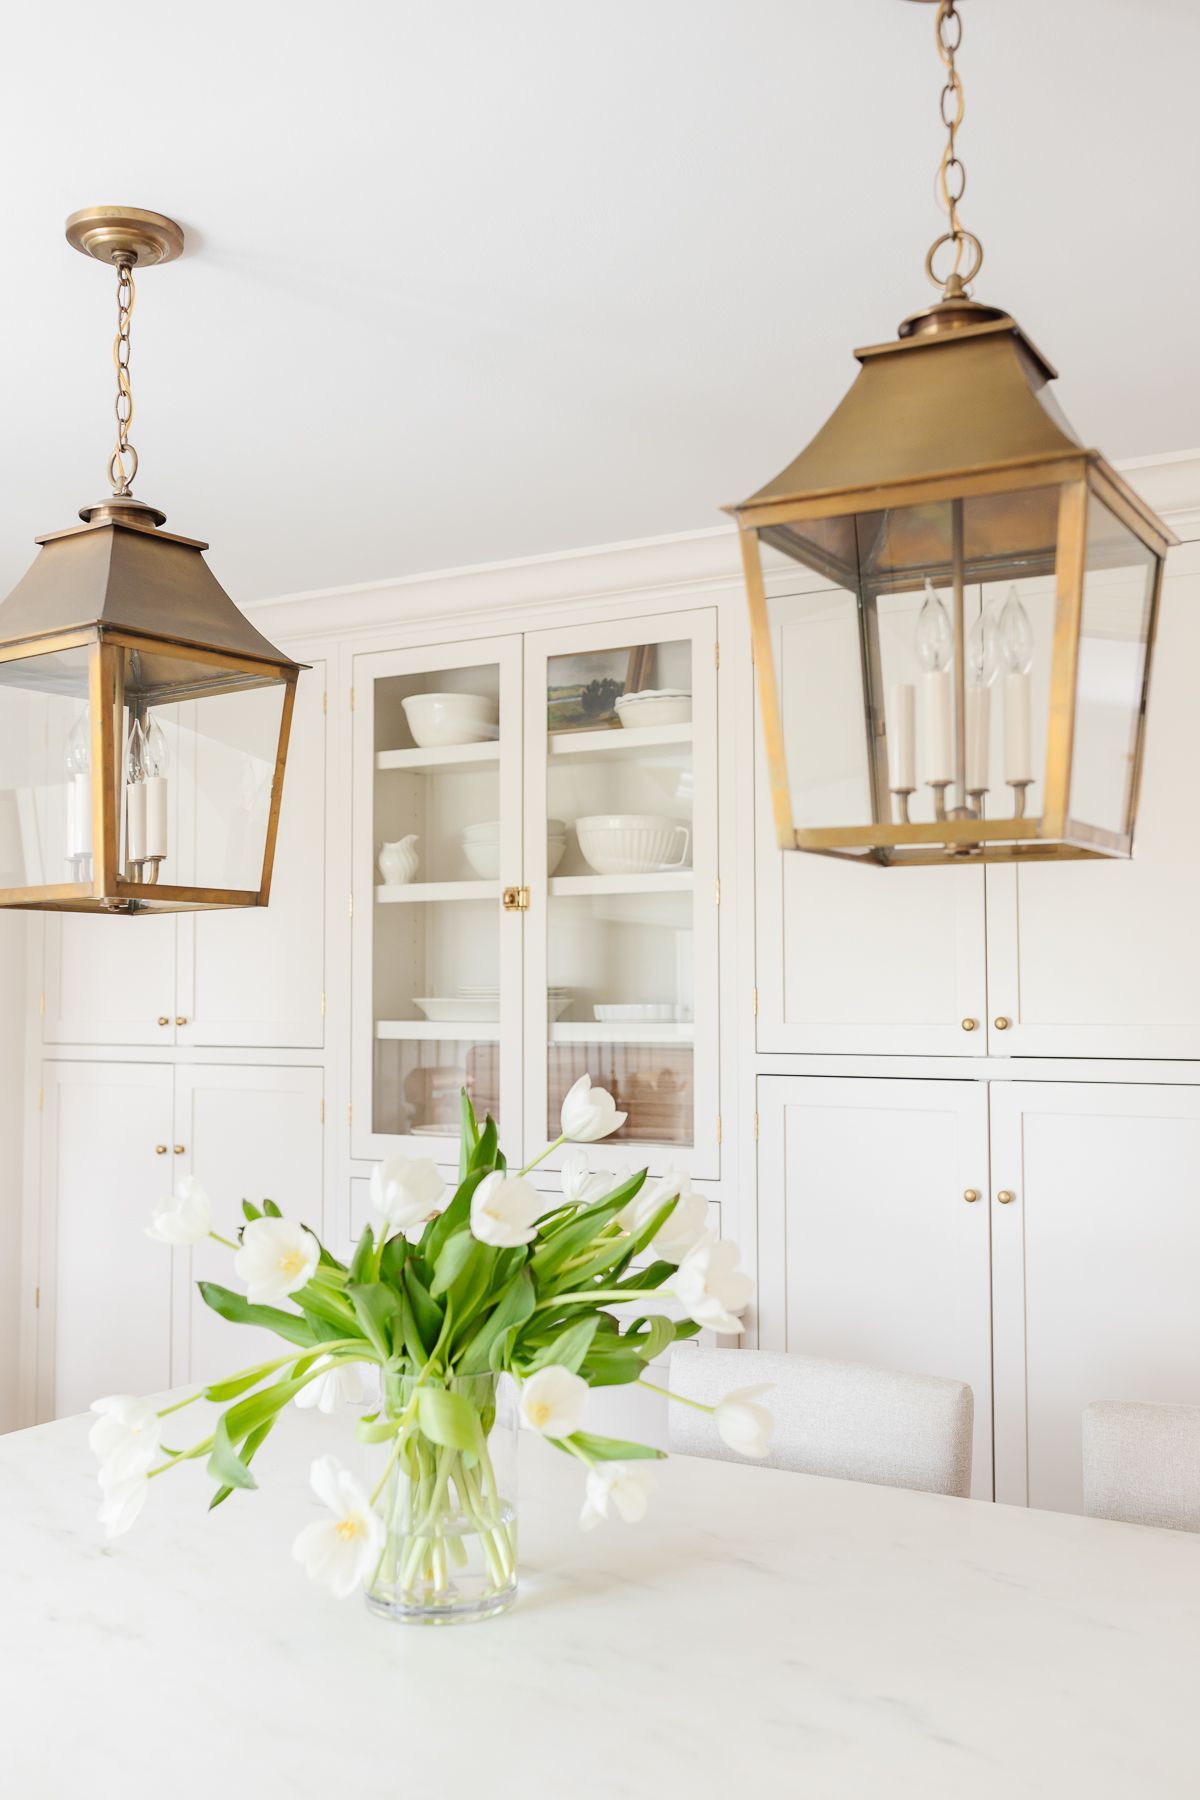 Widely Used Brass Lantern Pendant Lights (View 2 of 15)